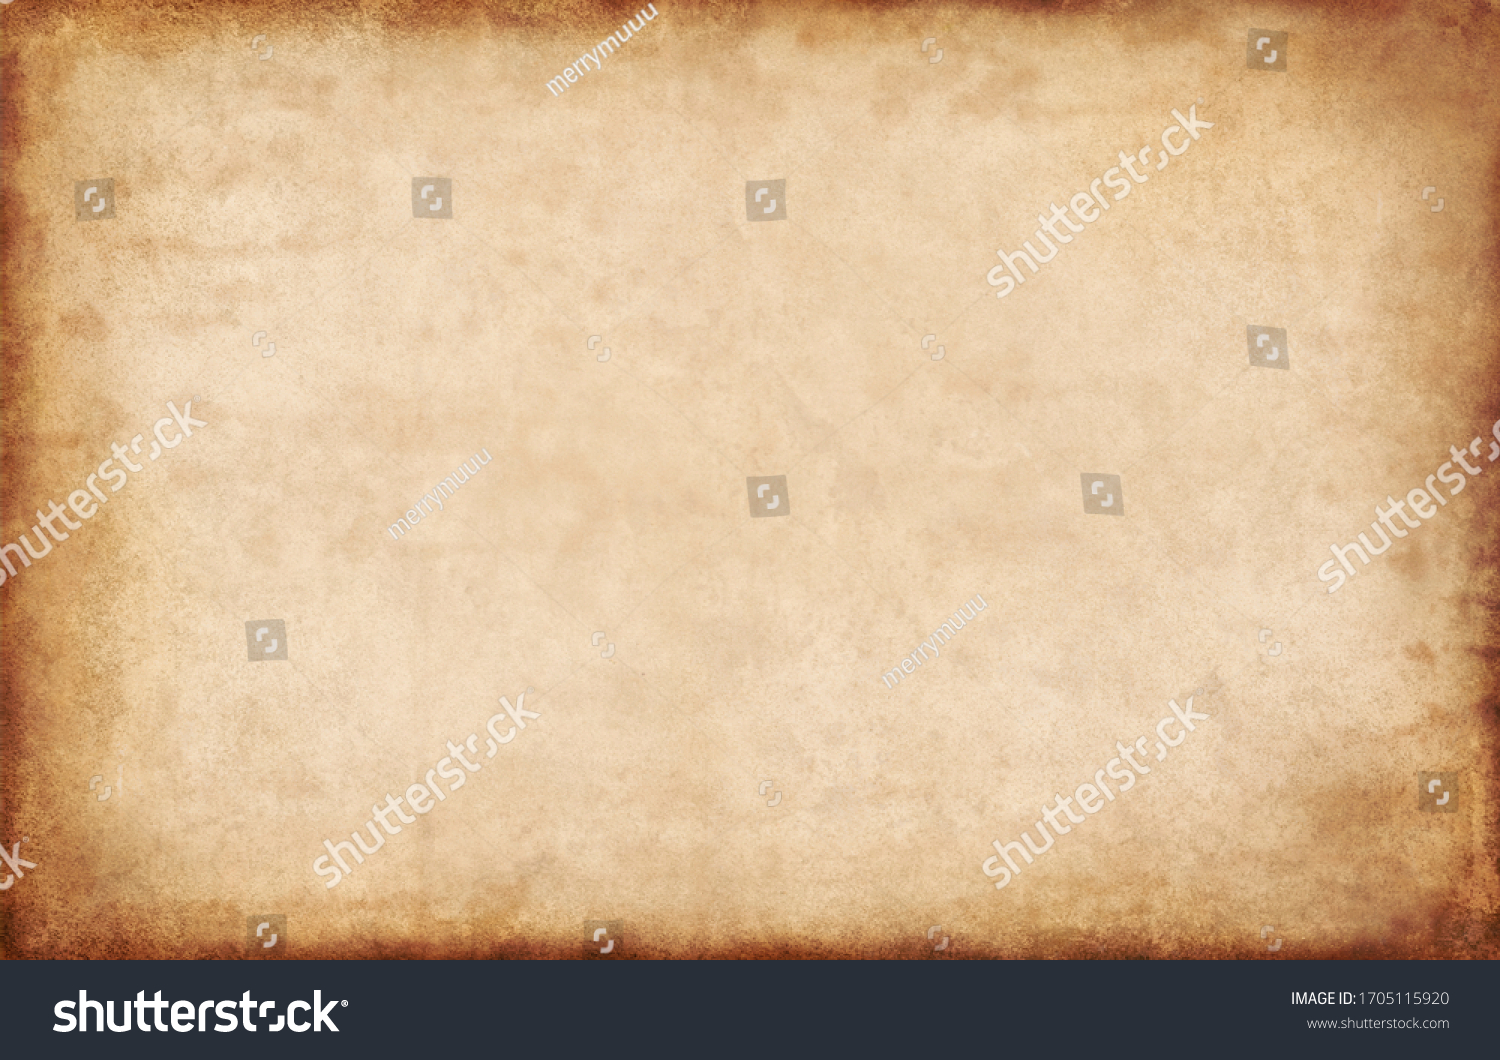 Old paper texture background, vintage retro newspaper empty blank space page with grunge stain line pattern for text creative, backdrop, wallpaper and any design
 #1705115920